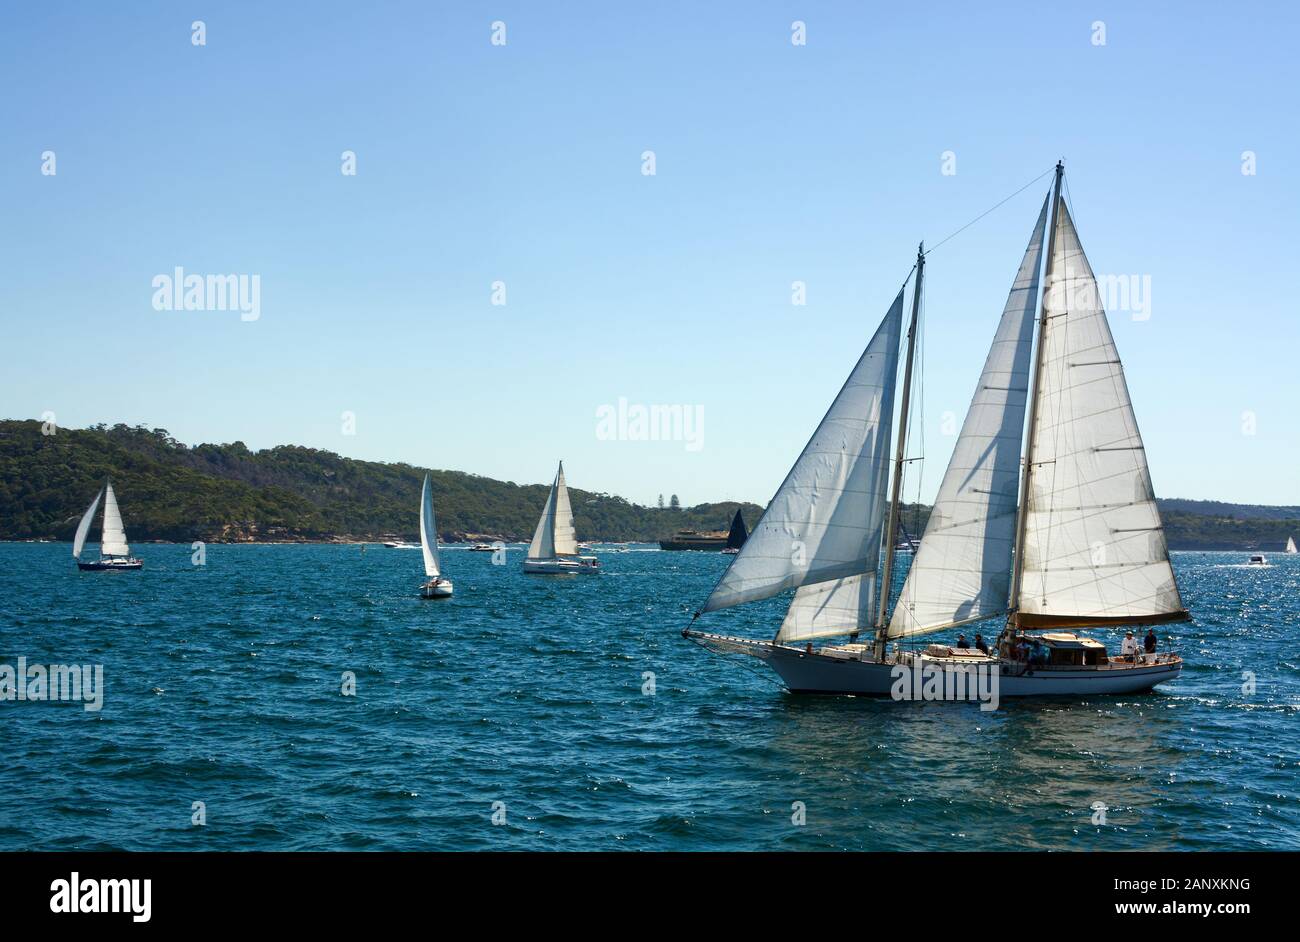 Sailboat with open sails cruising over choppy water in Sydney Harbor, Australia Stock Photo